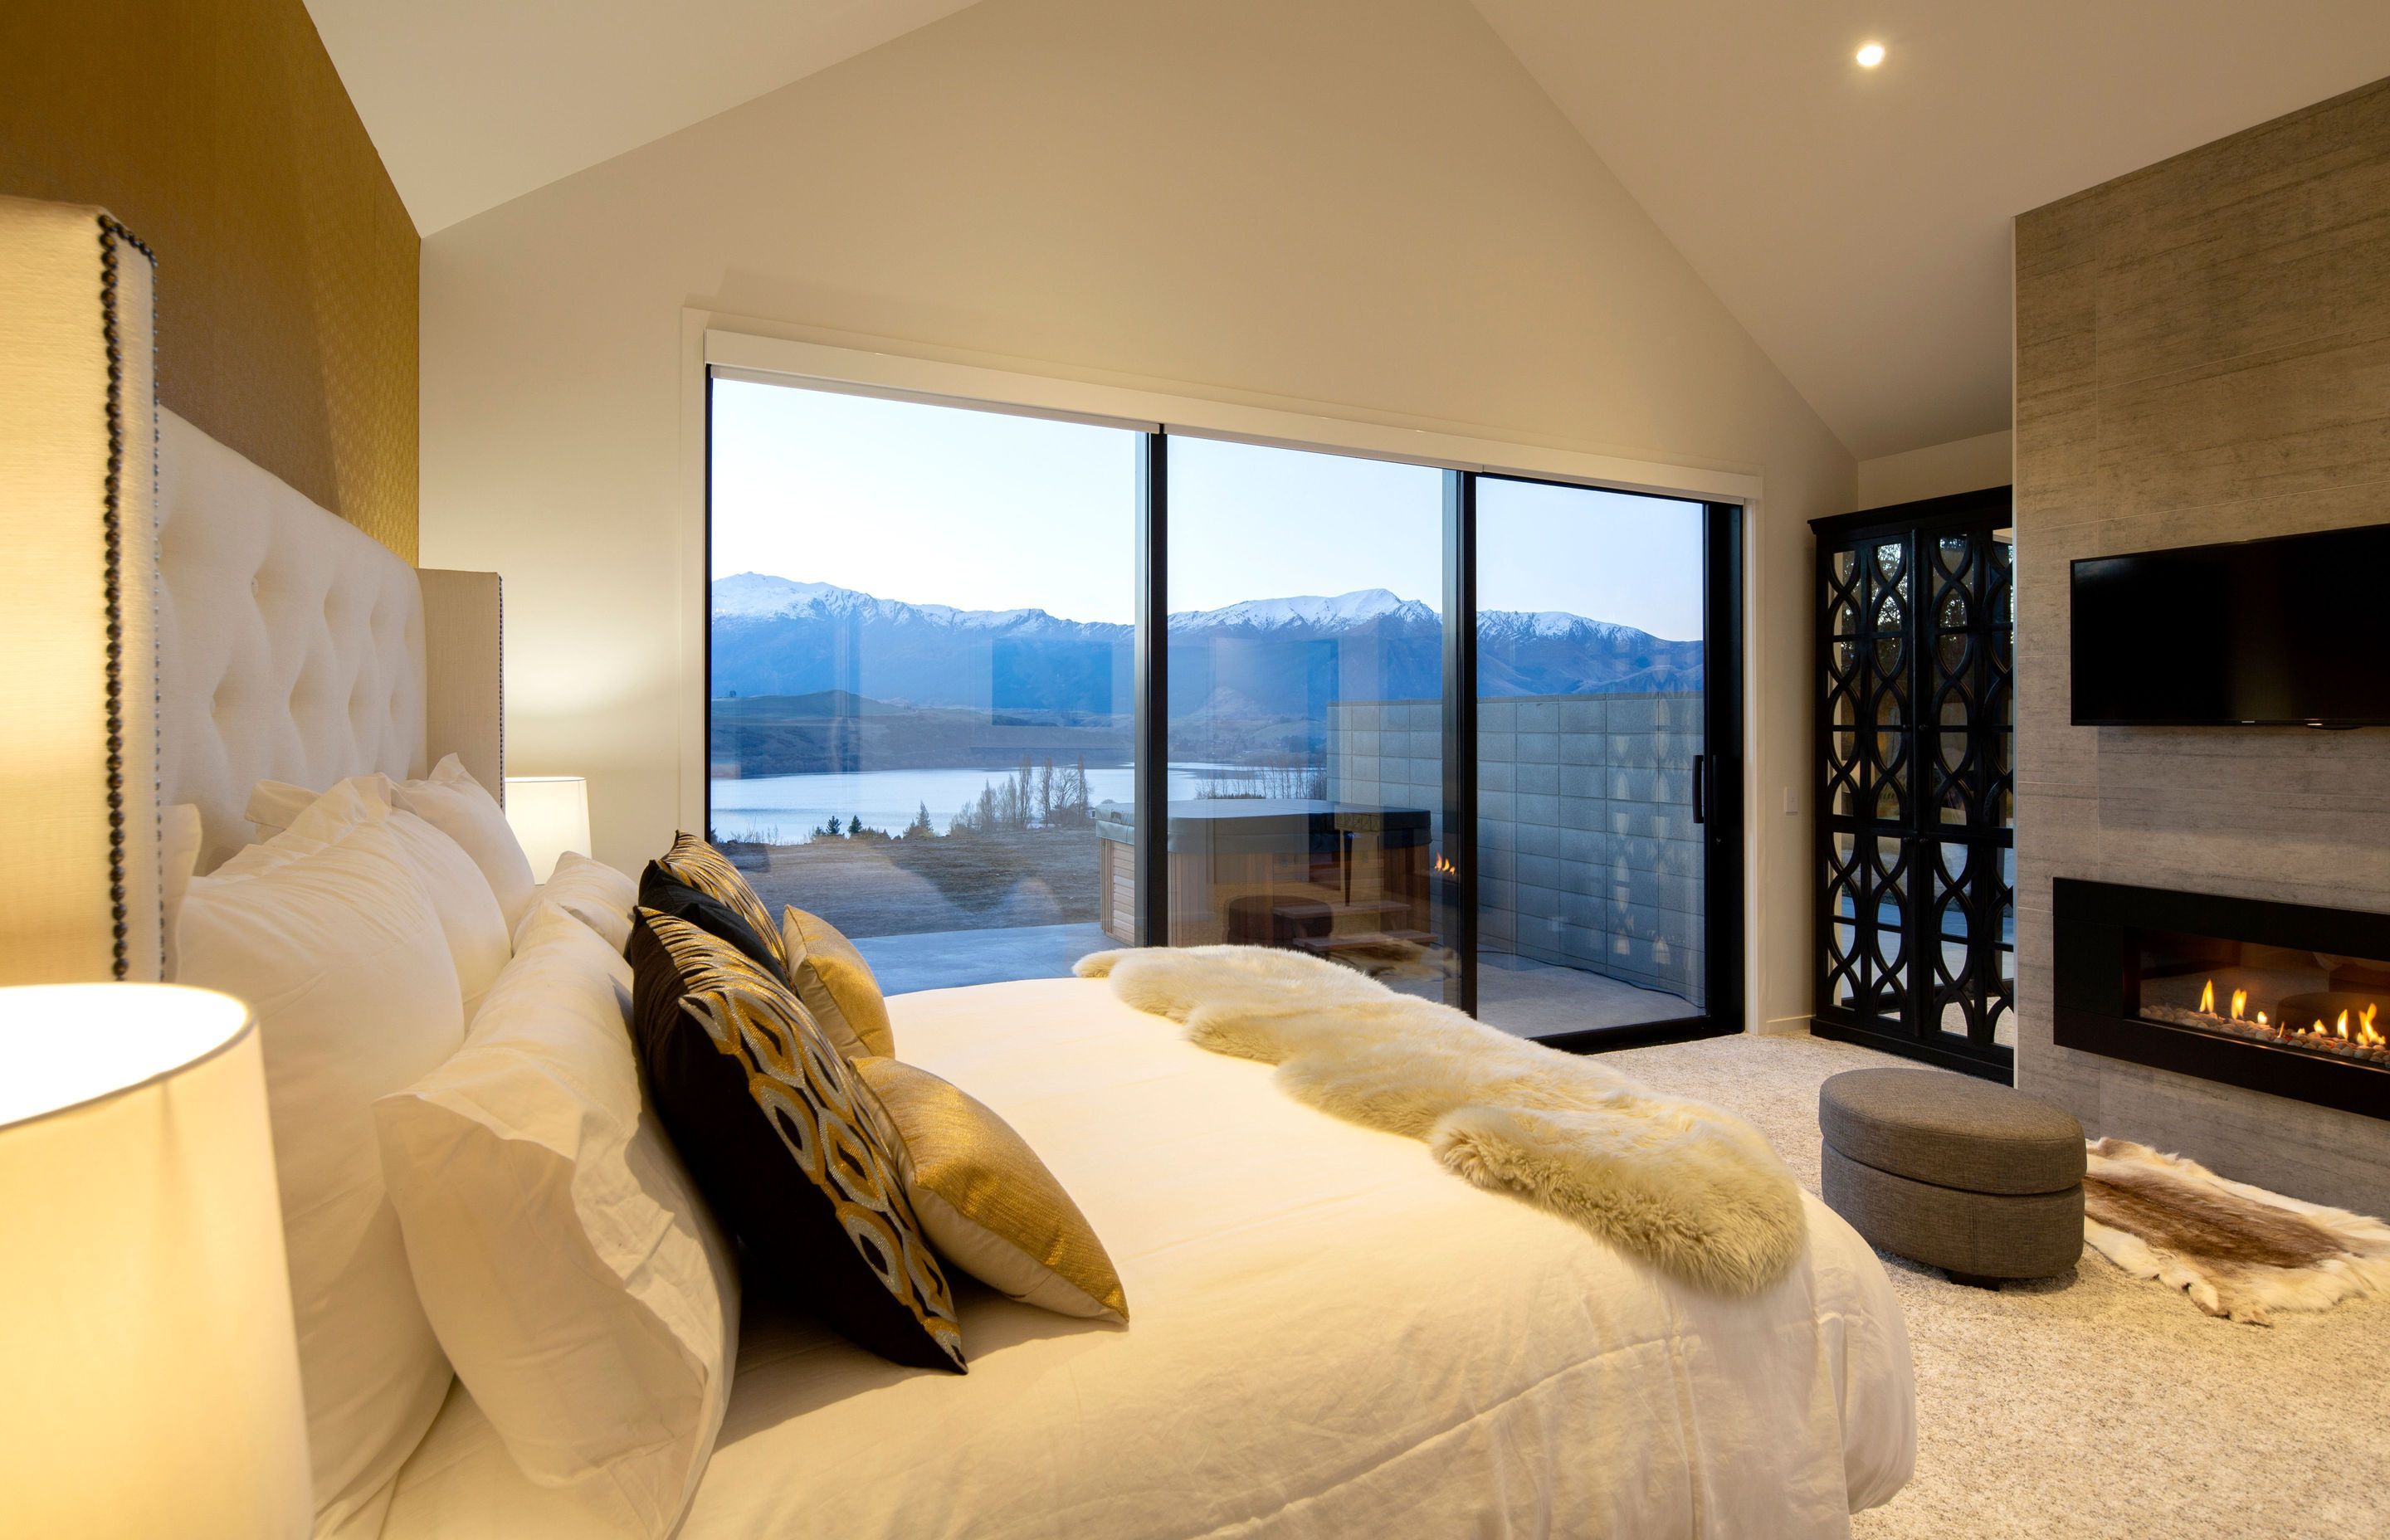 Main bedroom featuring a fireplace and decorative mirrored cupboard to reflect the view.